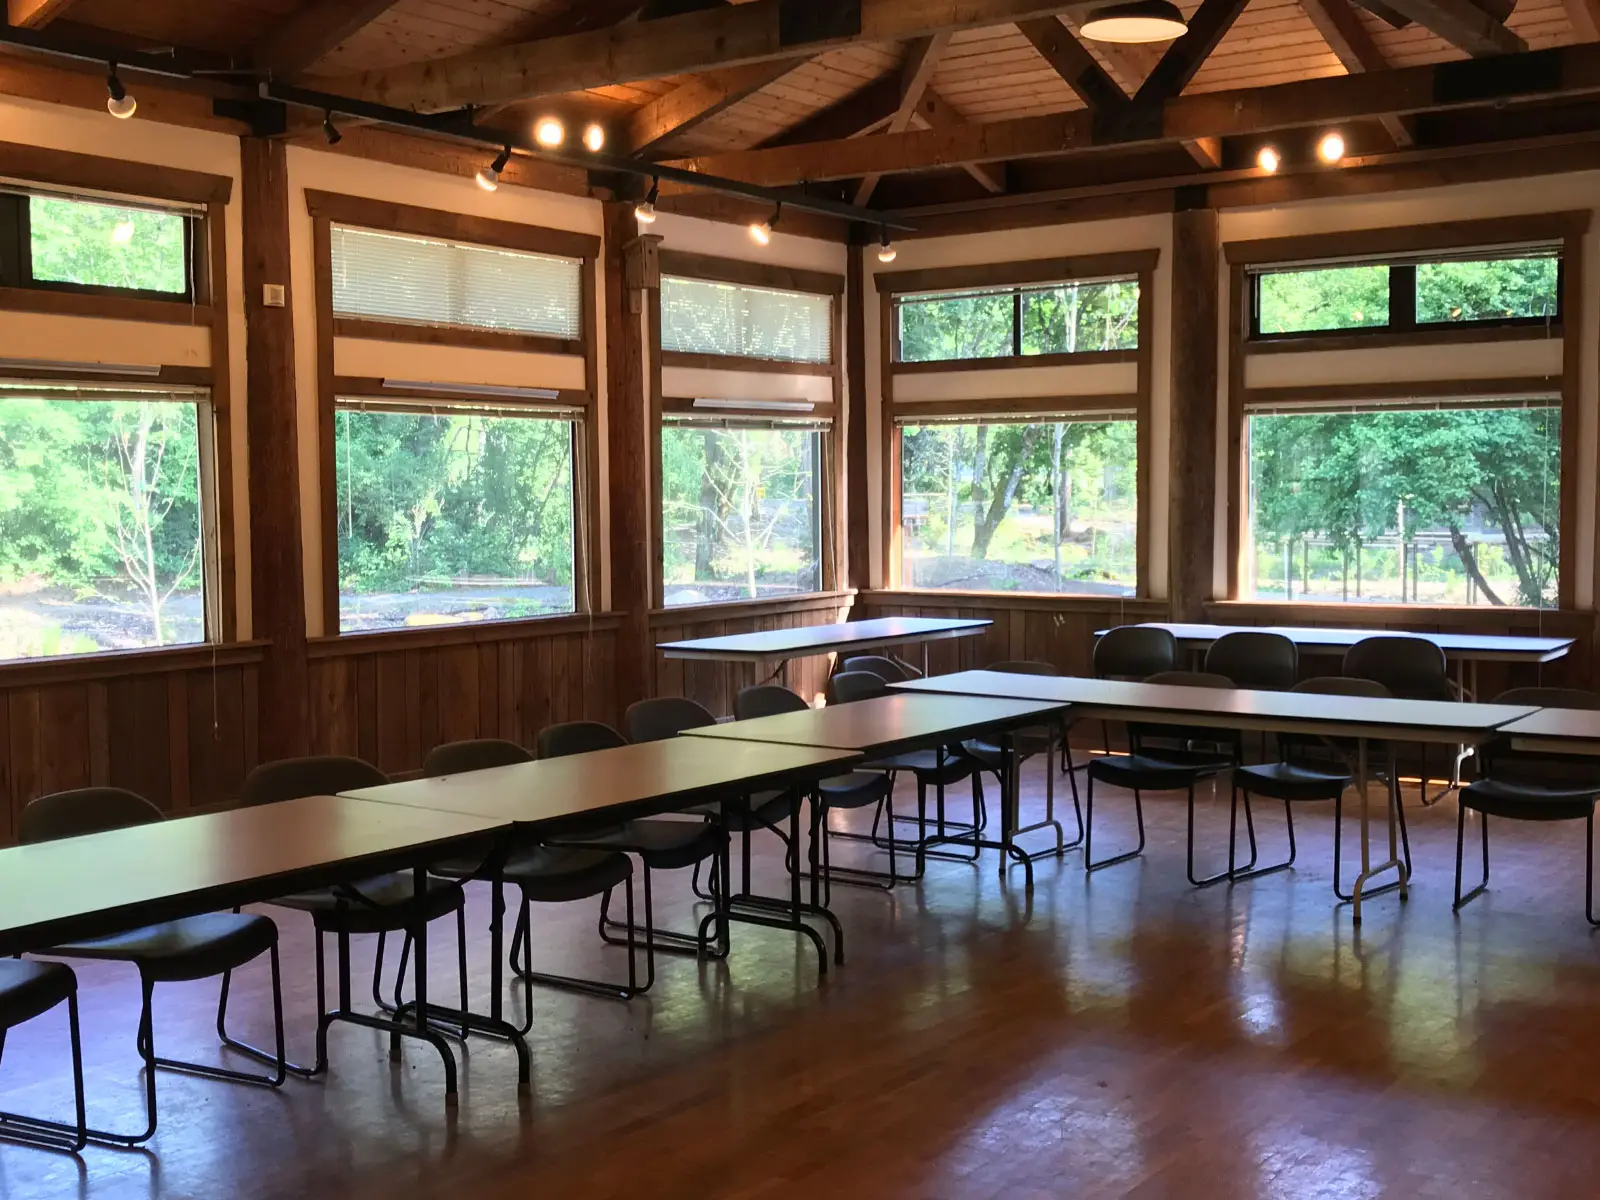 The inside of the Environmental Learning Center's Lakeside Hall, with rows of conference tables chairs